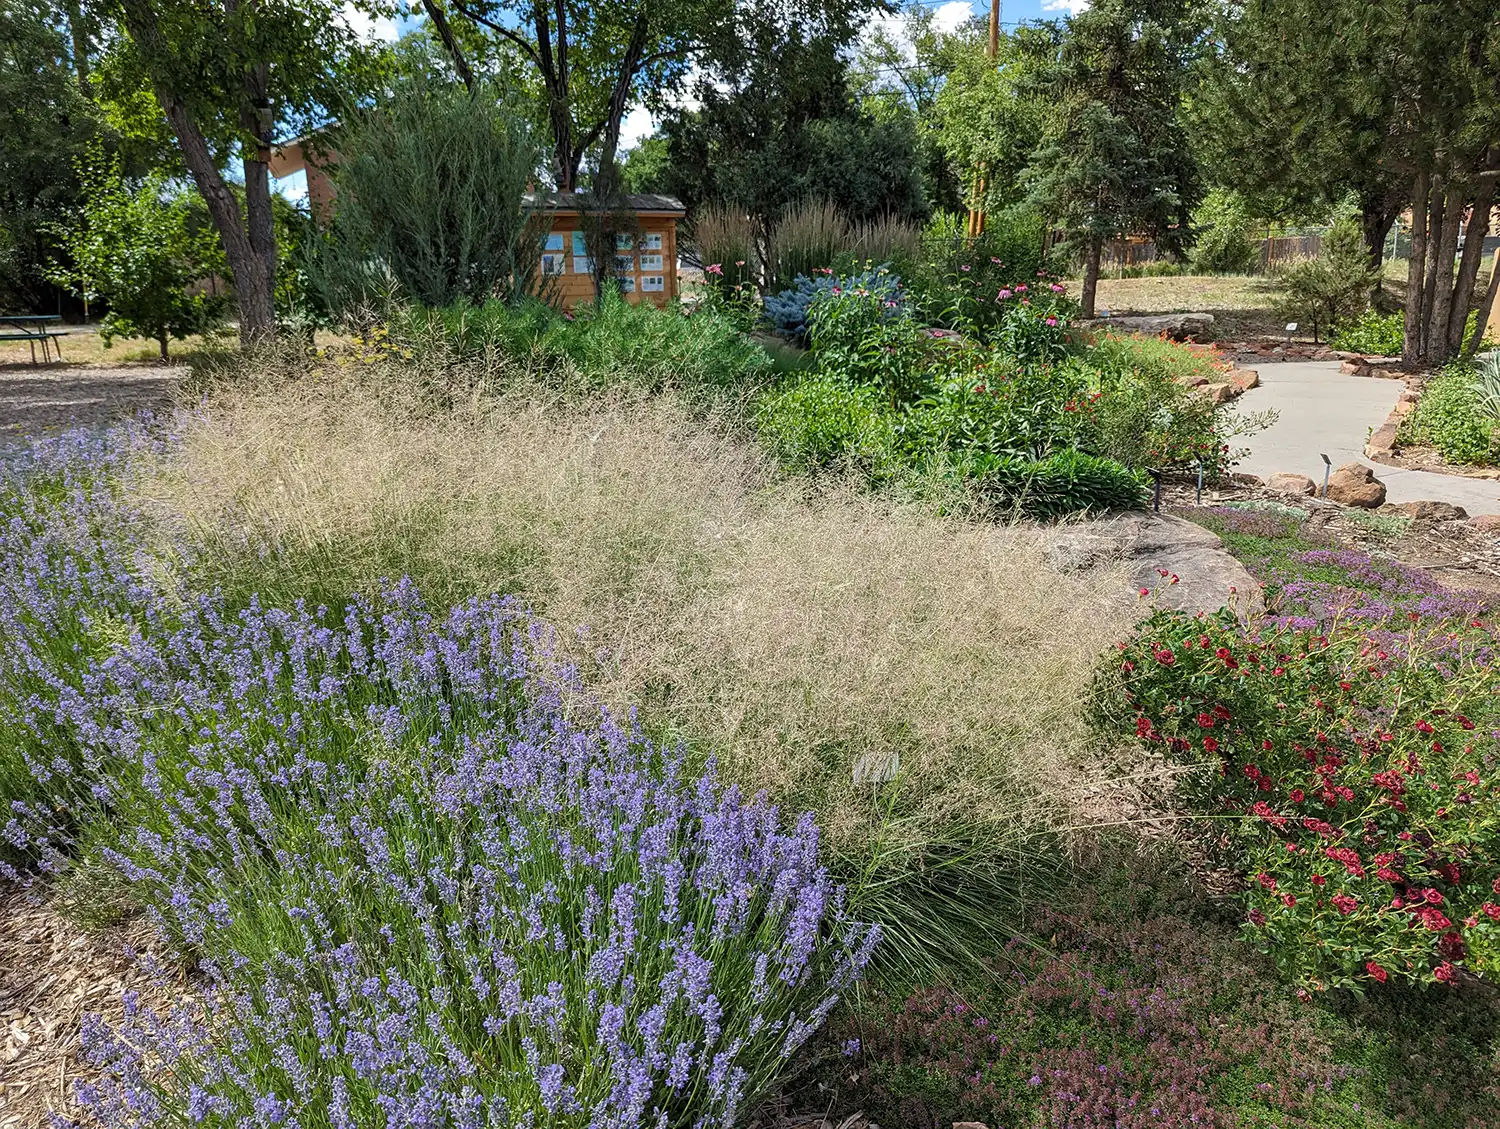 Landscape design at the Taos Library in July 2023